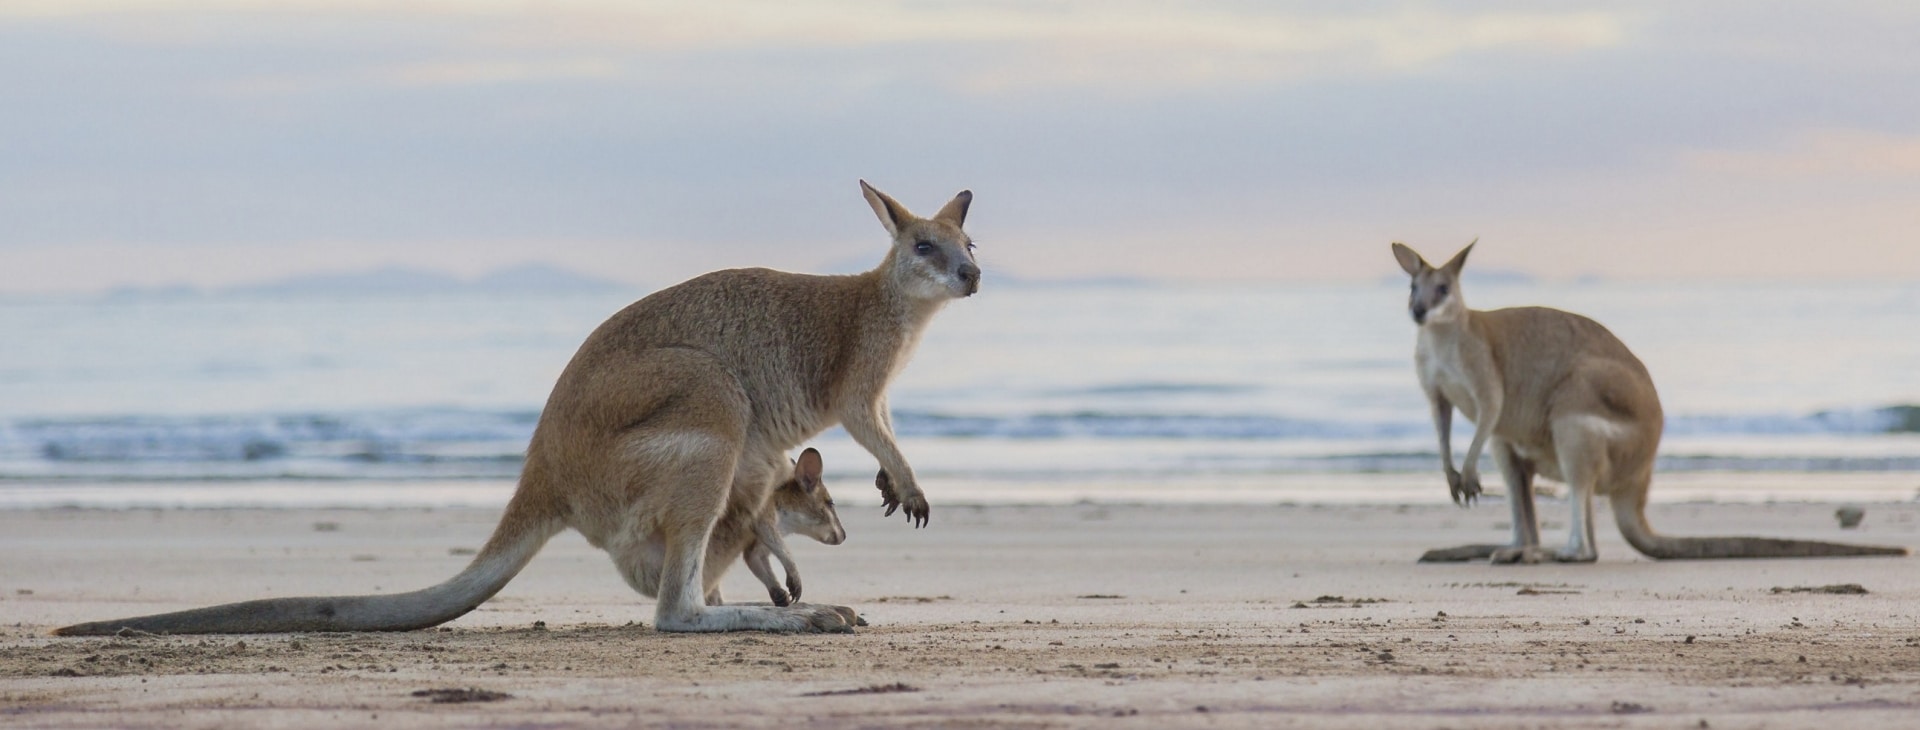 Kangaroos on the beach at sunset at Cape Hillsborough National Park © Tourism and Events Queensland